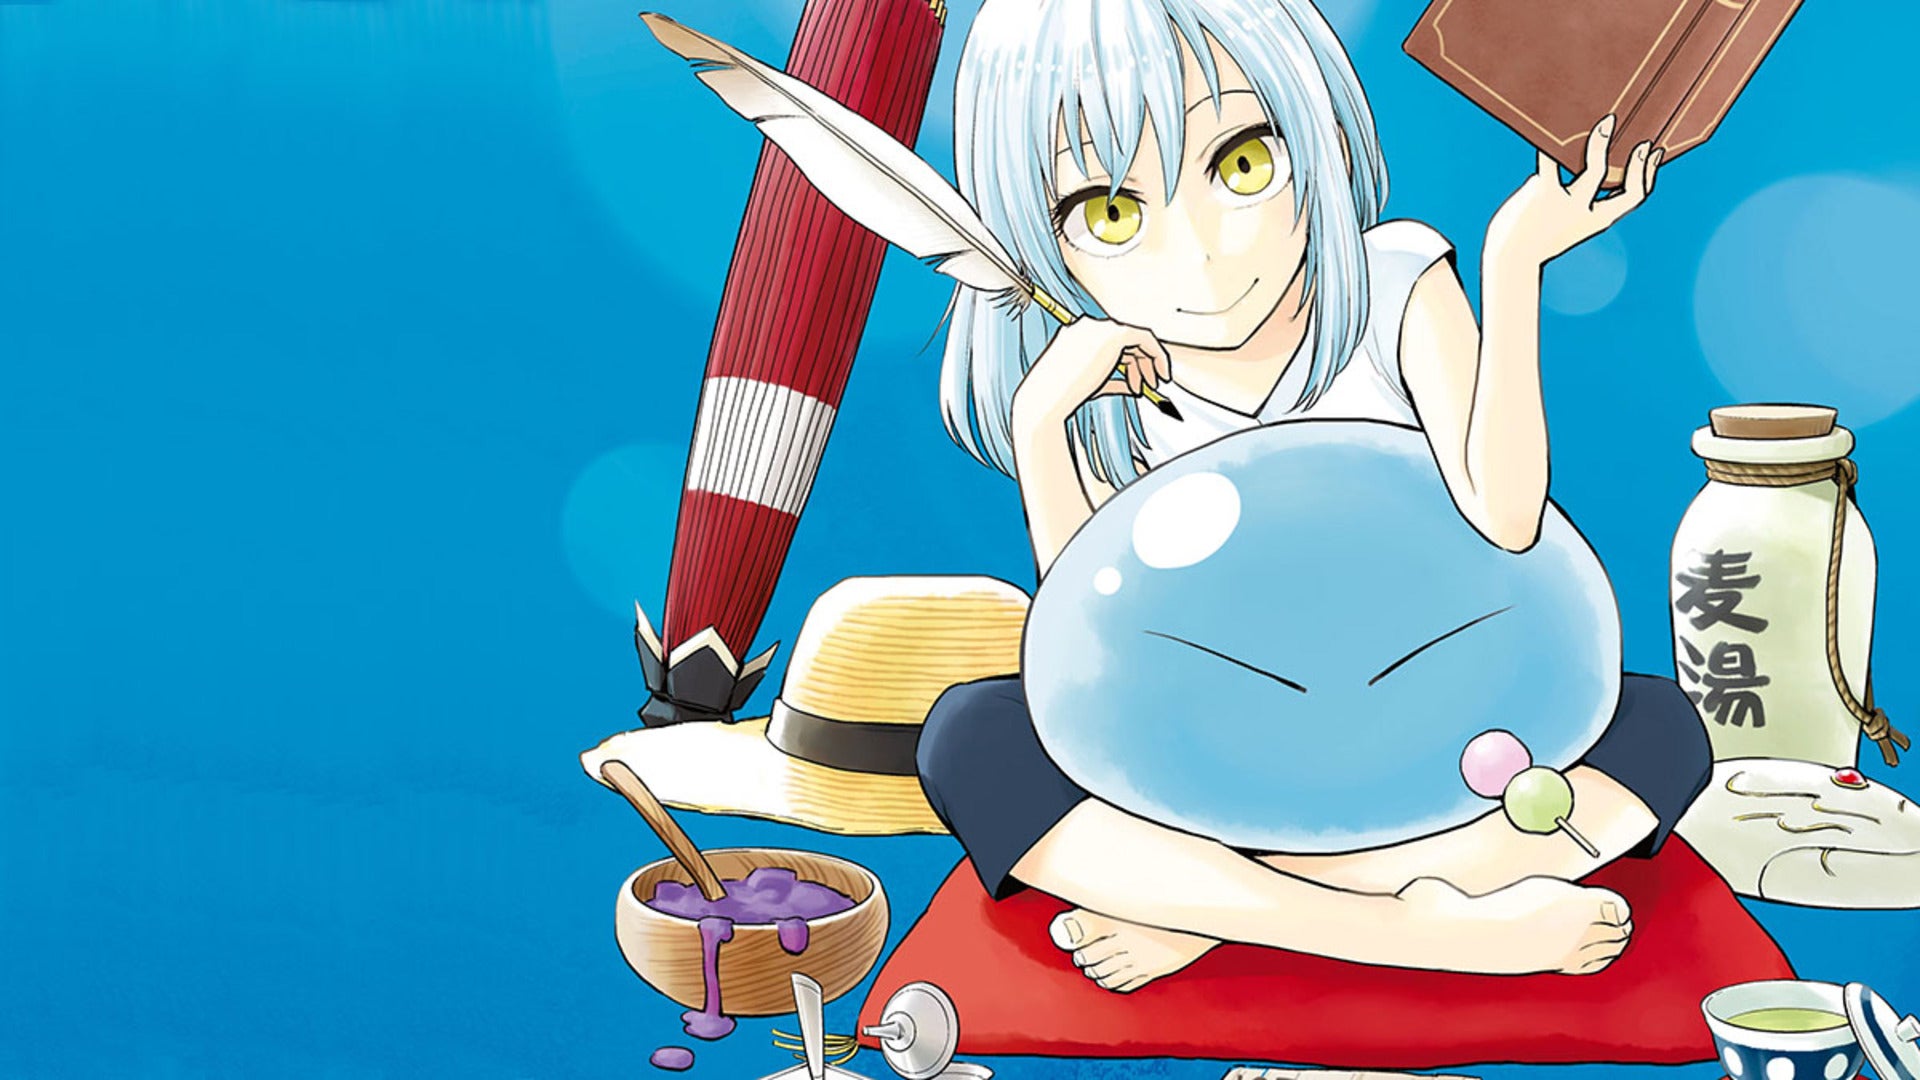 The Slime Diaries Rimuru SpinOff Planned for January 2021